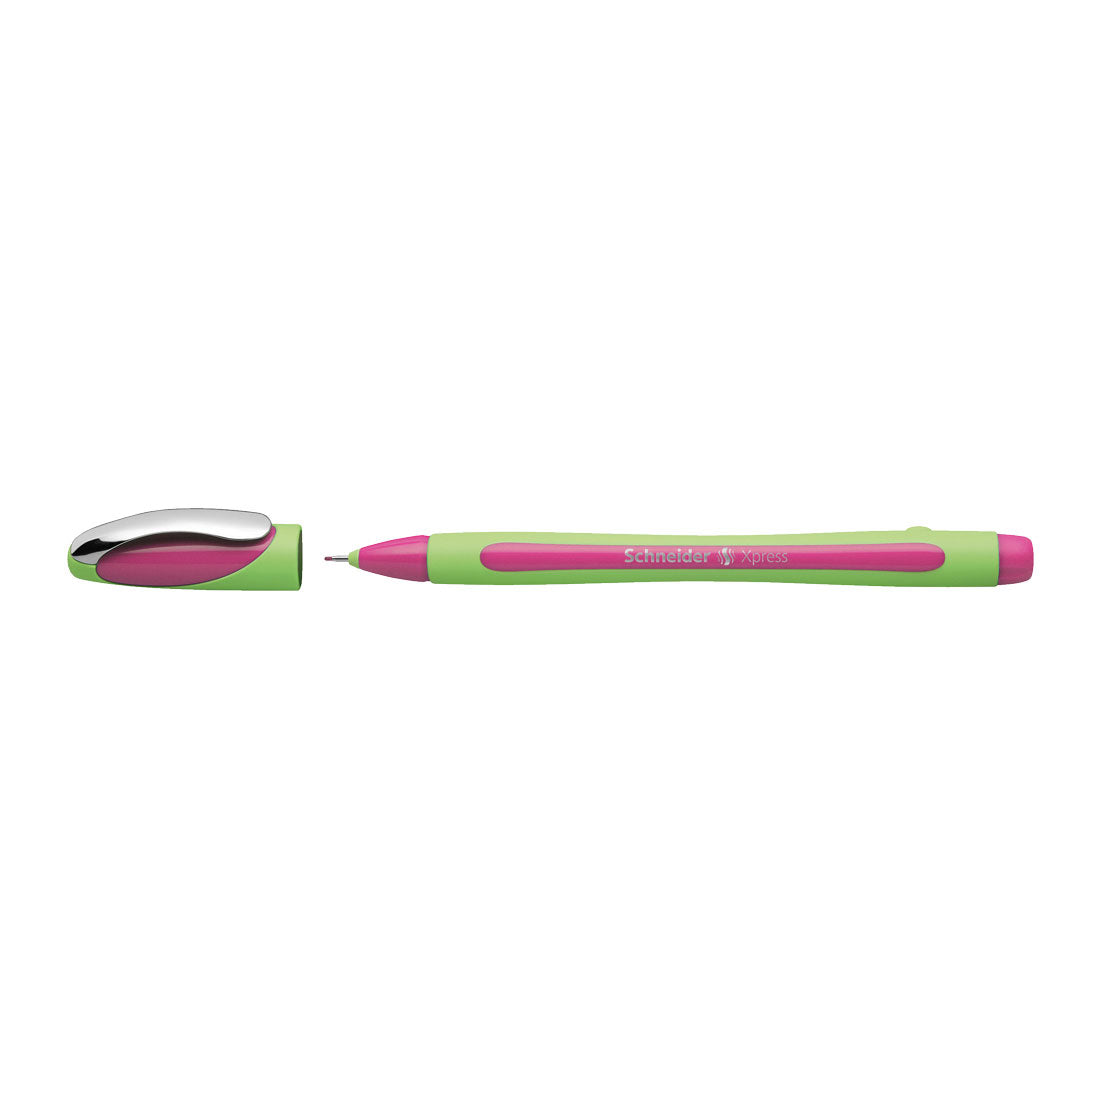 Xpress Fineliners 0.8mm, Box of 10#colour_pink